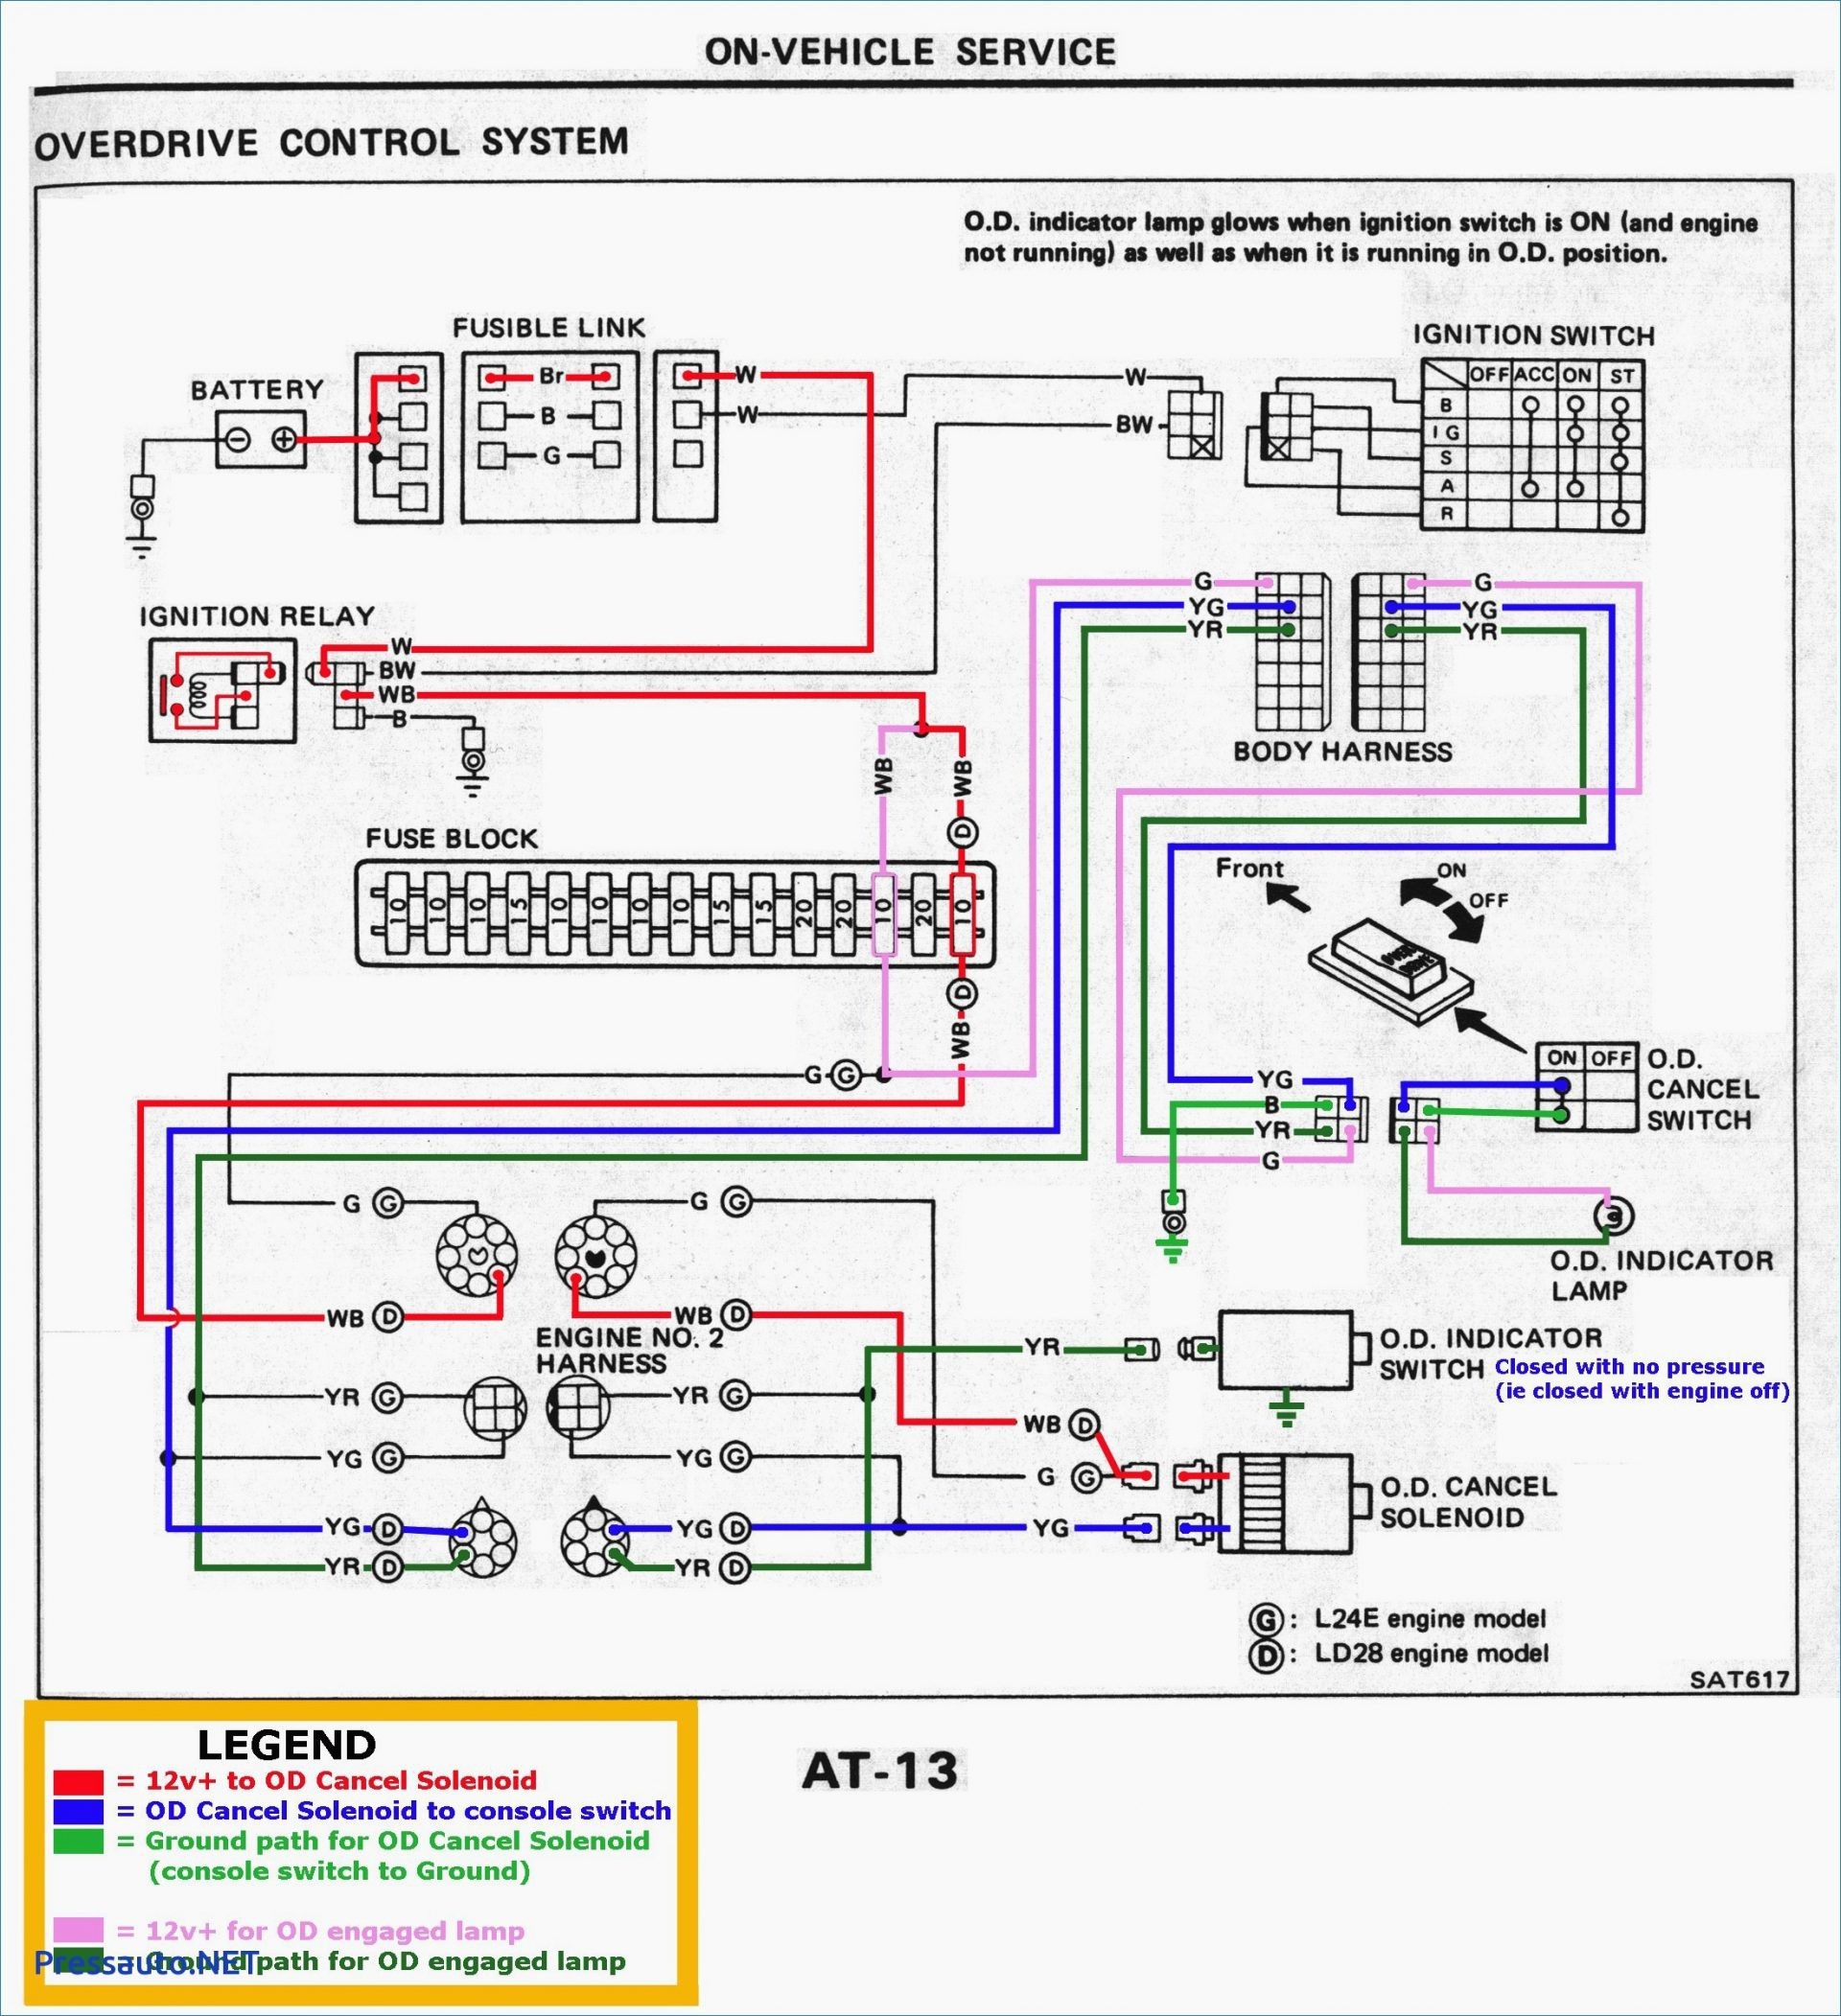 Tail Light Wiring Diagram Chevy Best Nissan 1400 Wiring Diagram Free Wiring Diagram